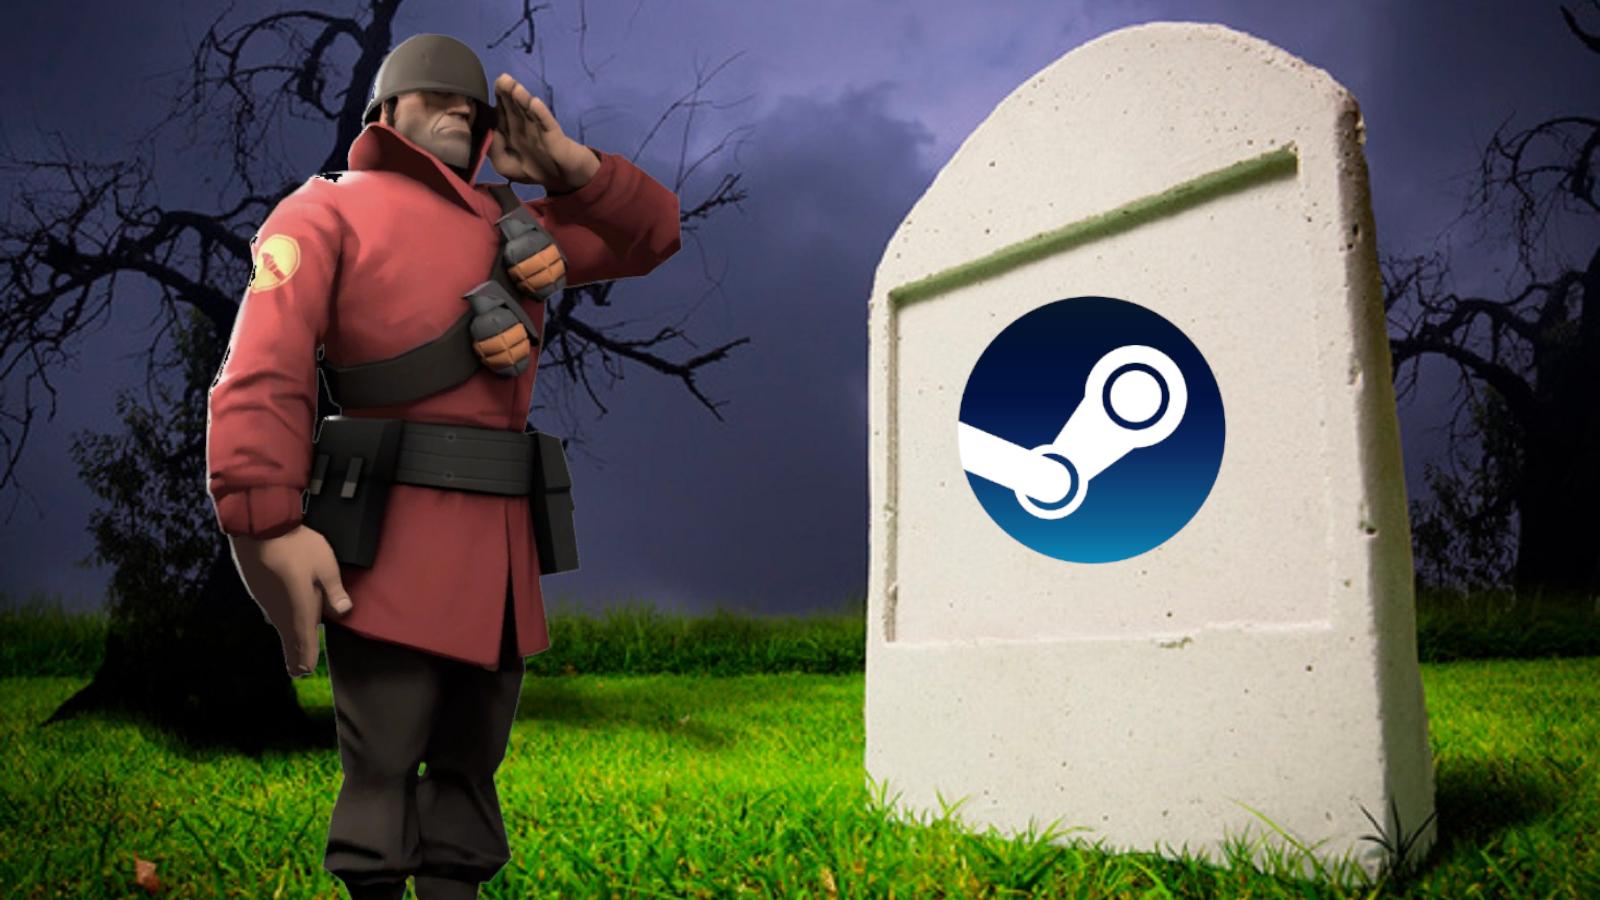 team fortress 2 tf2 soldier saulting a grave with the steam logo on it steam players will lose accounts when they die